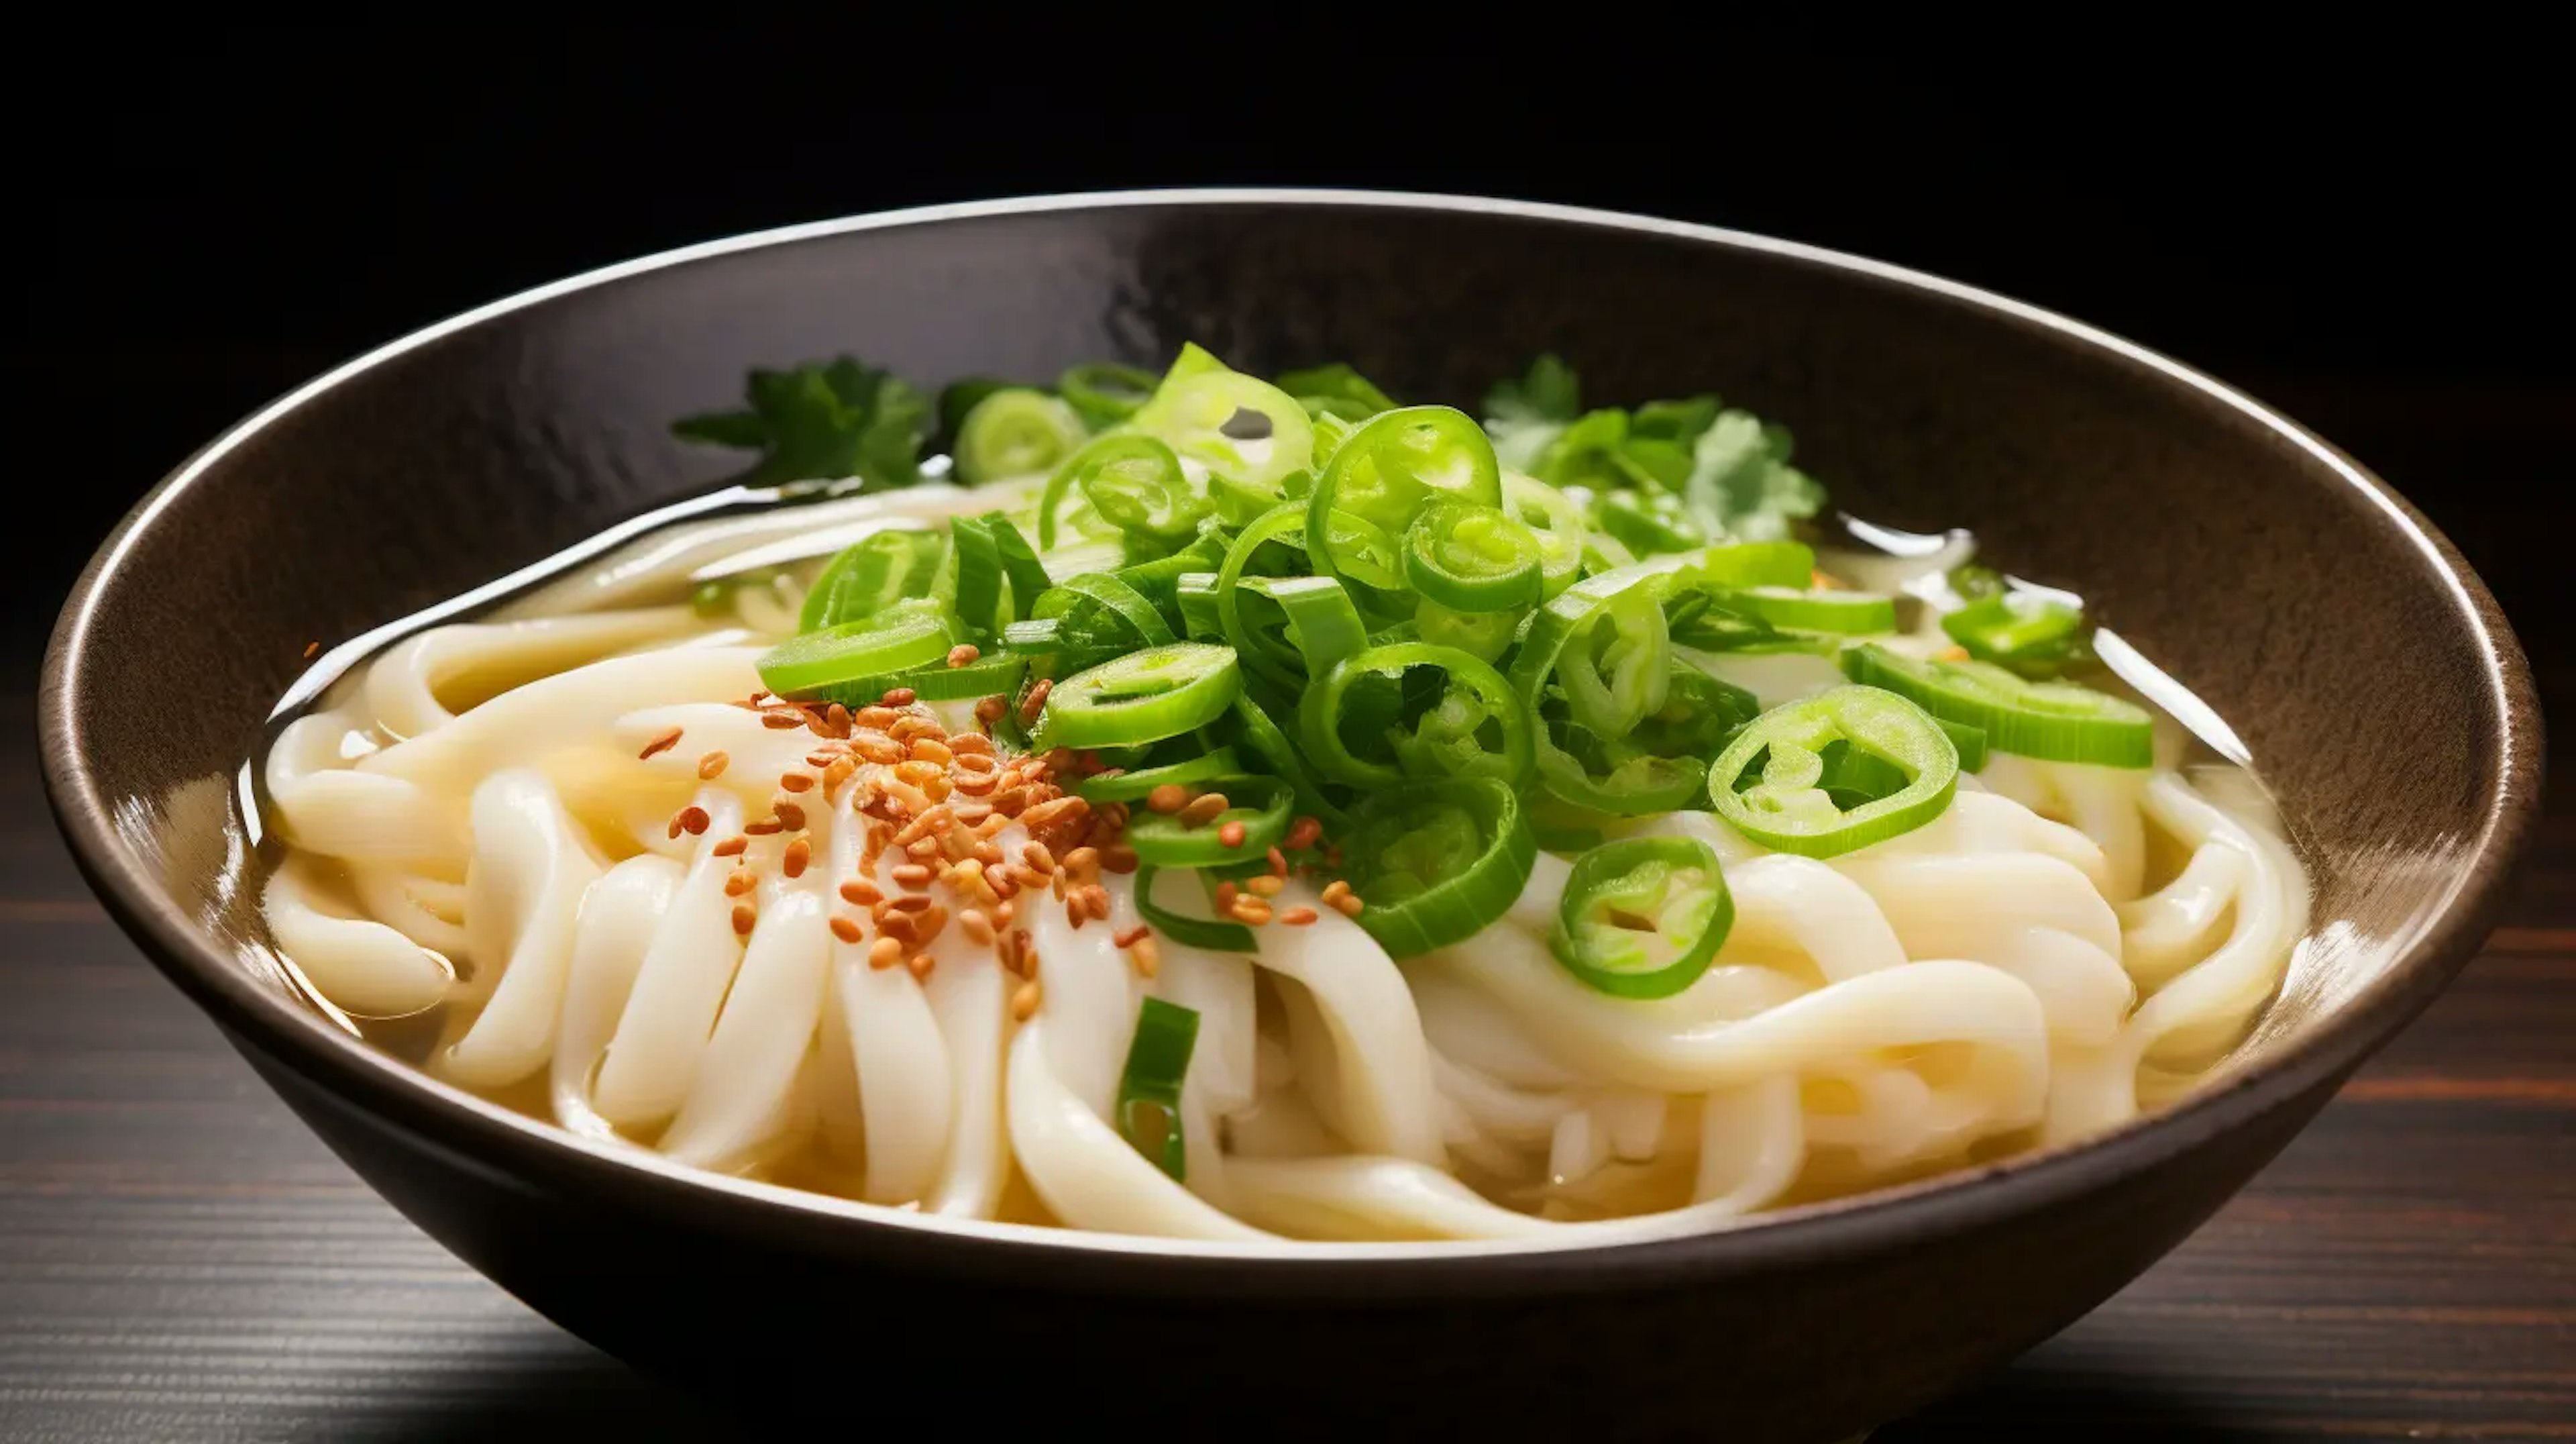 steaming bowl of kake udon, highlighting the clear broth, chewy udon noodles, and freshly chopped green onions